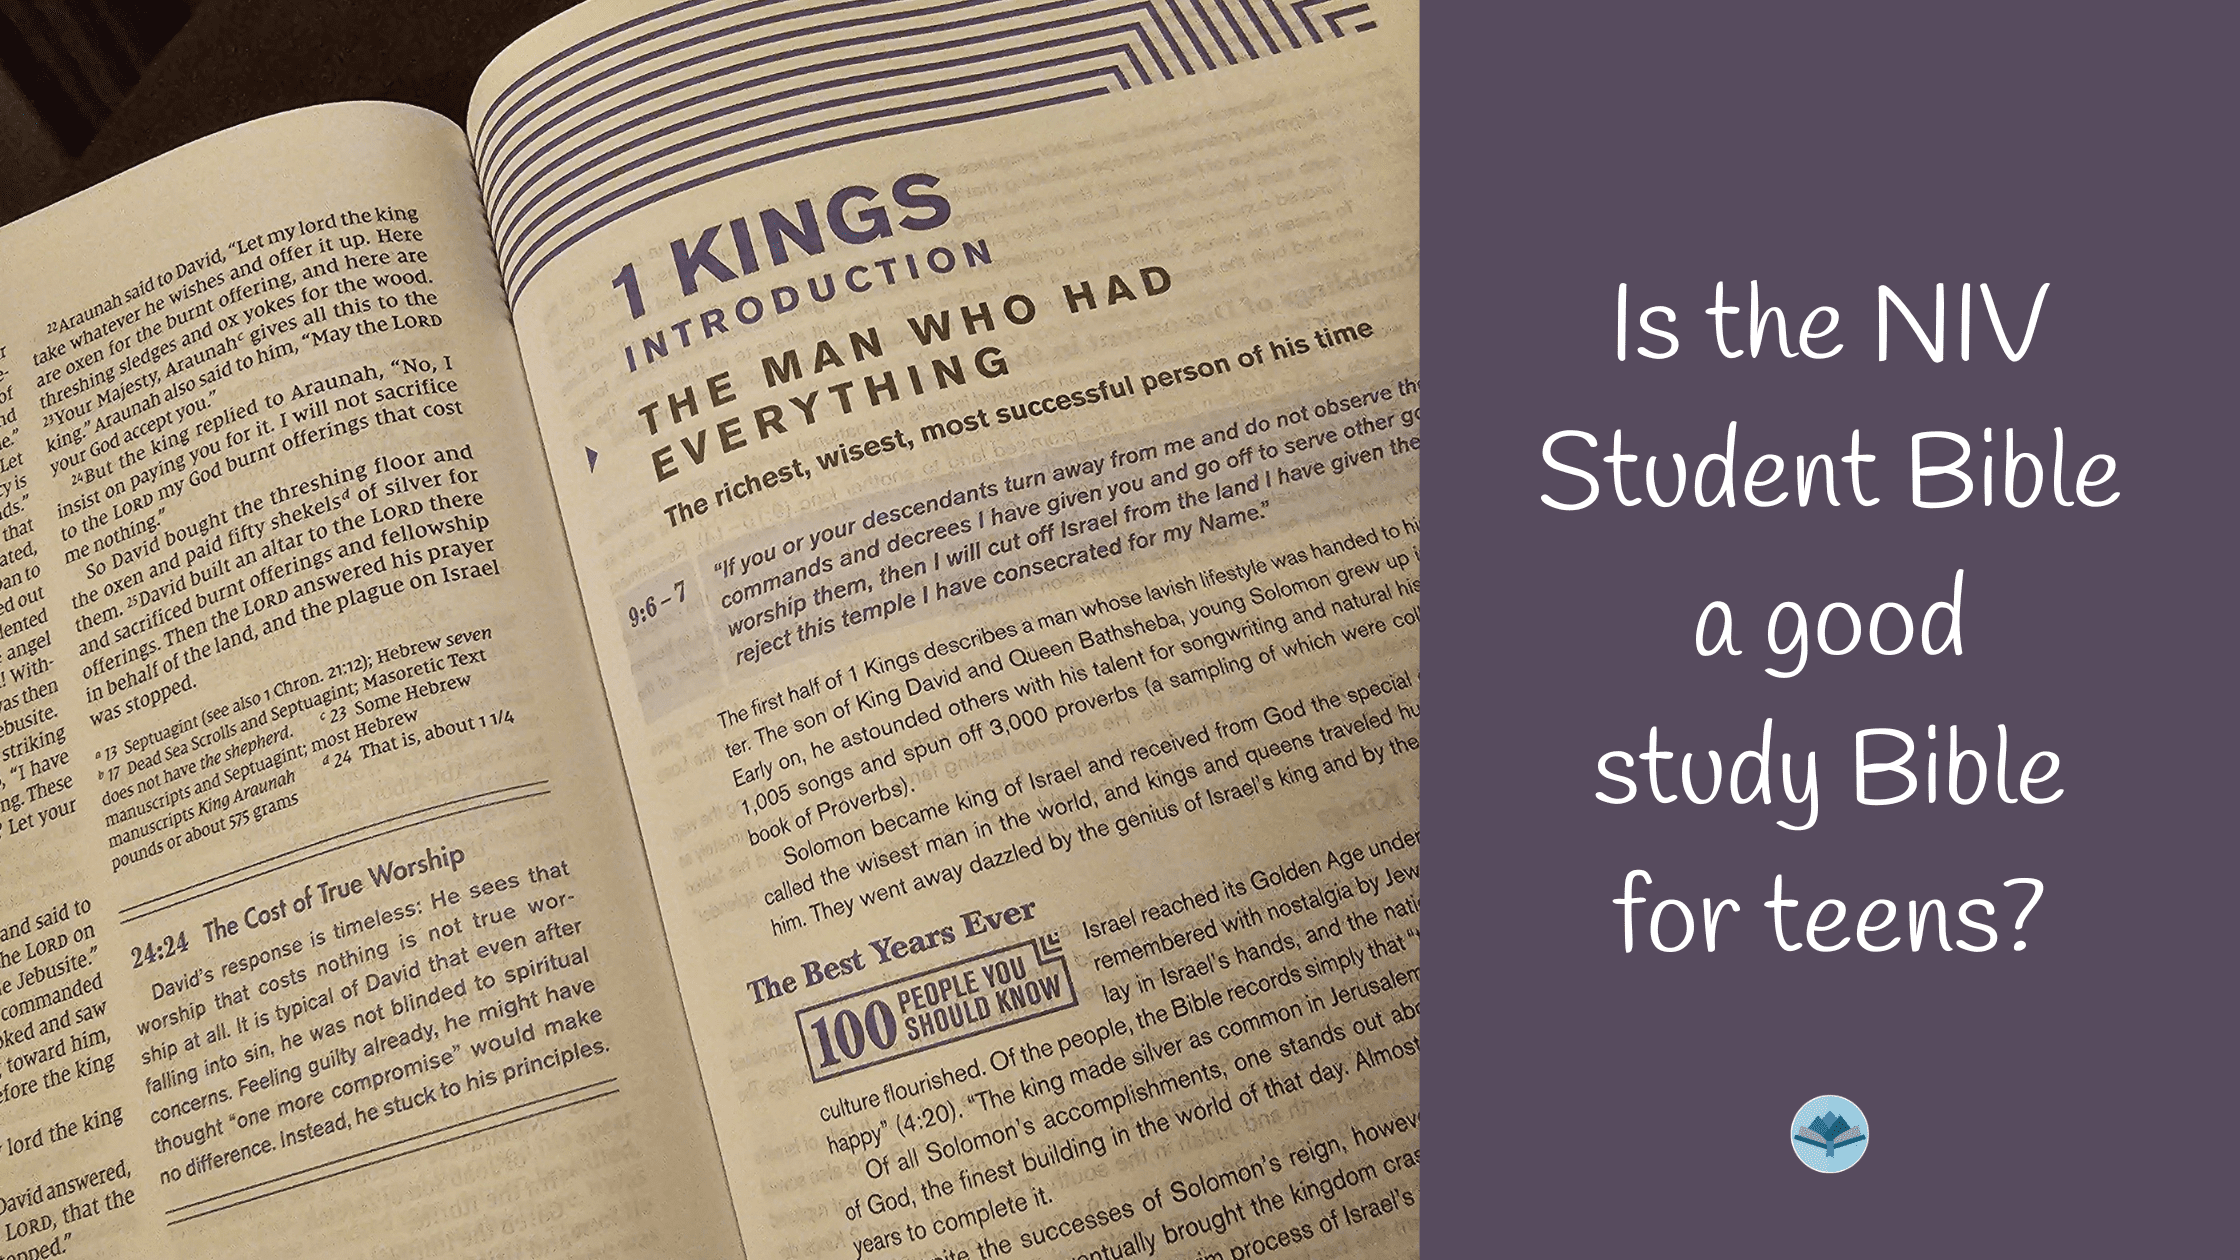 Is the NIV Student Bible a good study Bible for teens